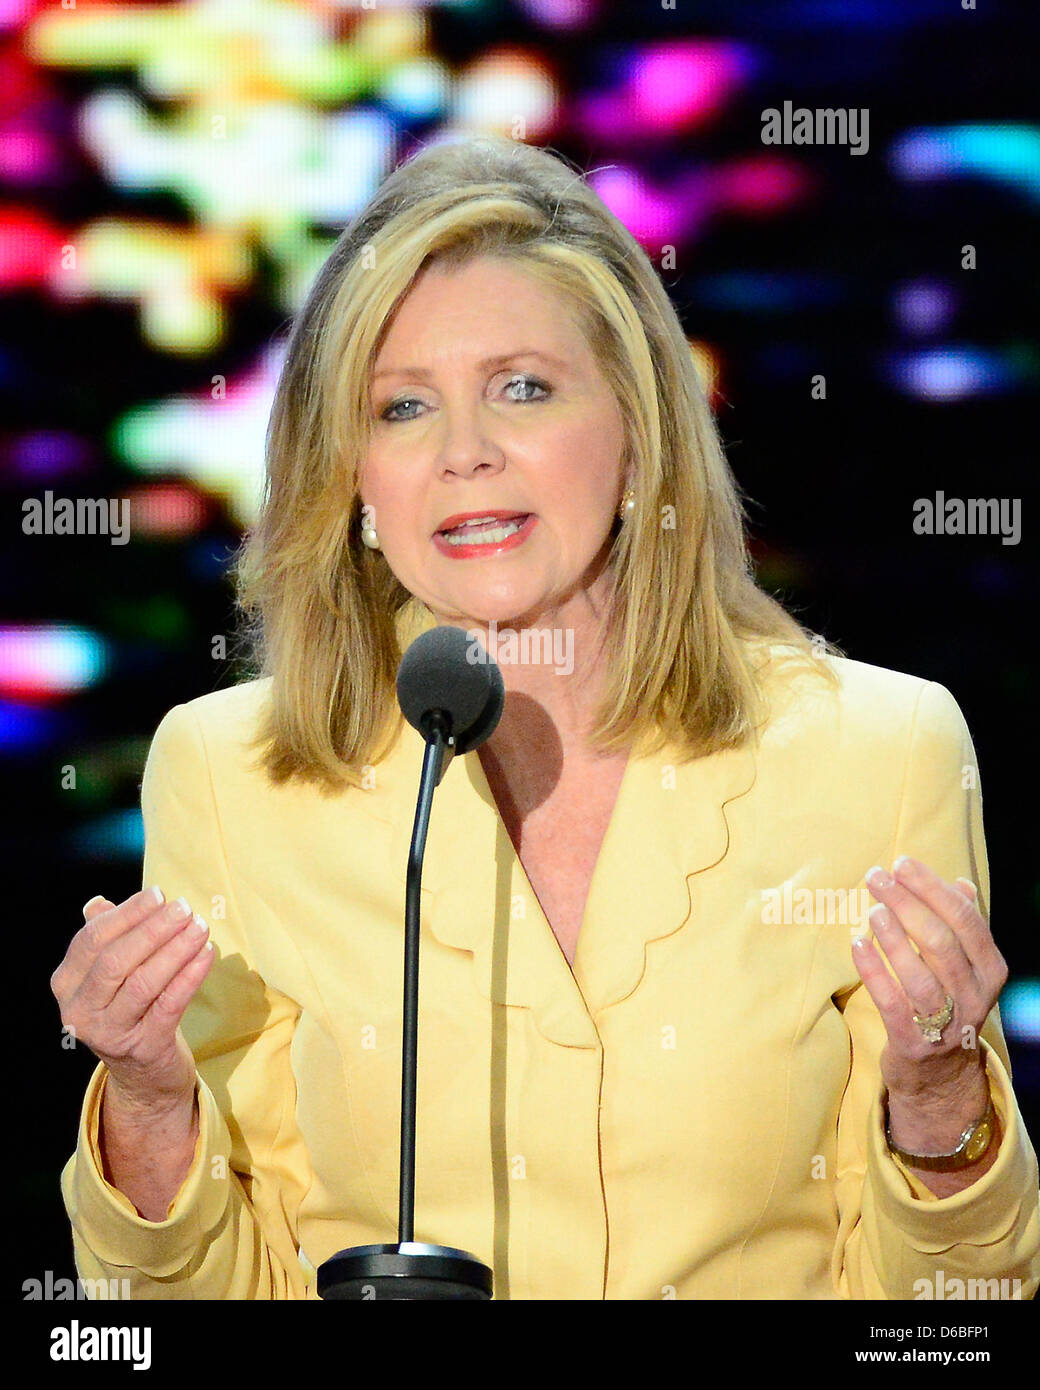 United States Representative Marsha Blackburn (Republican of Tennessee), Co-Chair, Committee on Resolutions, makes remarks at the 2012 Republican National Convention in Tampa Bay, Florida on Tuesday, August 28, 2012. .Credit: Ron Sachs / CNP.(RESTRICTION: NO New York or New Jersey Newspapers or newspapers within a 75 mile radius of New York City) Stock Photo